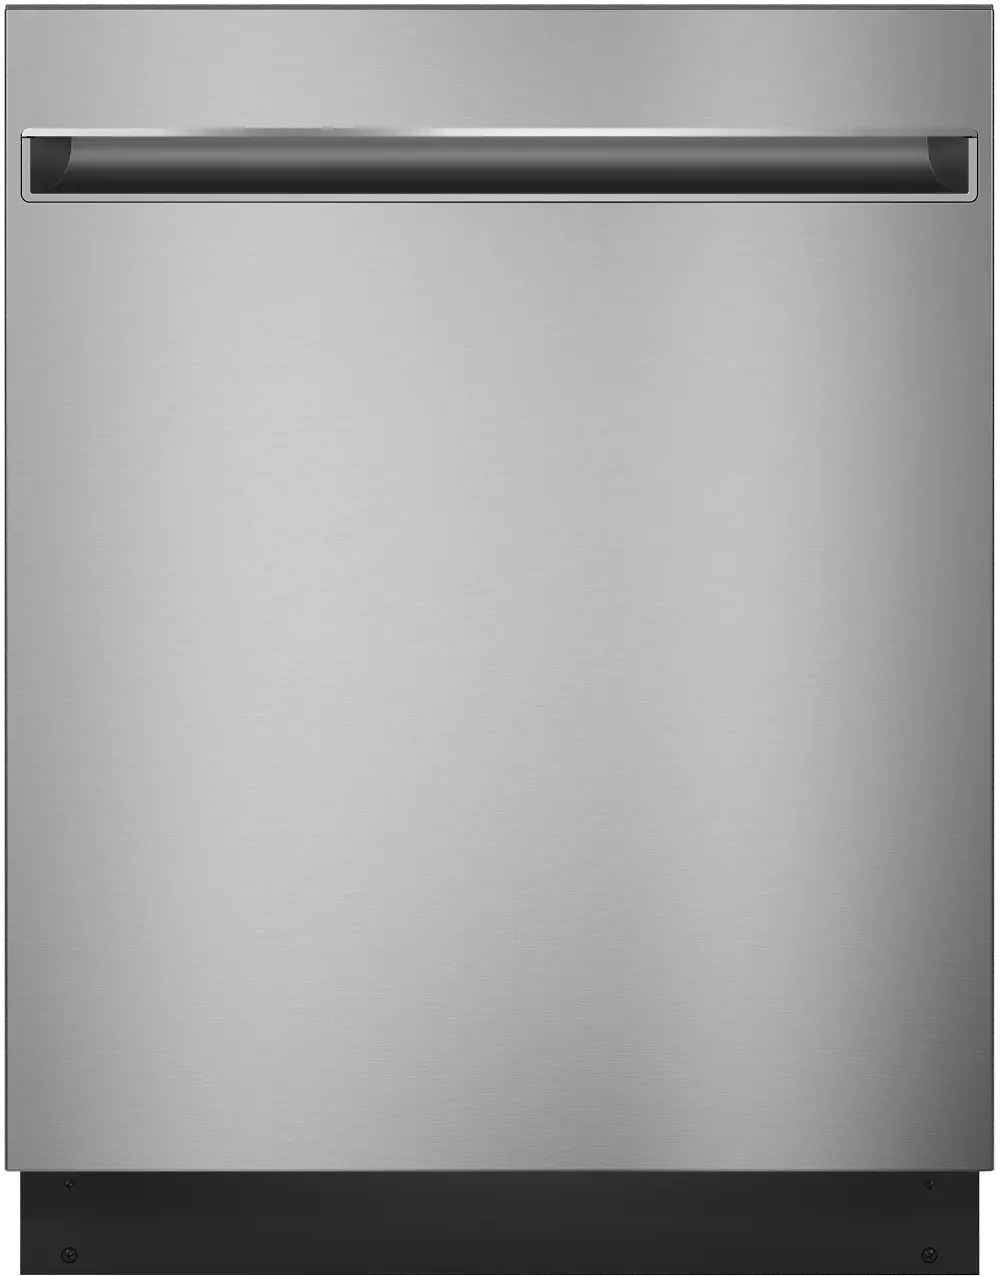 GDT225SSLSS GE Top Control Dishwasher - Stainless Steel-1